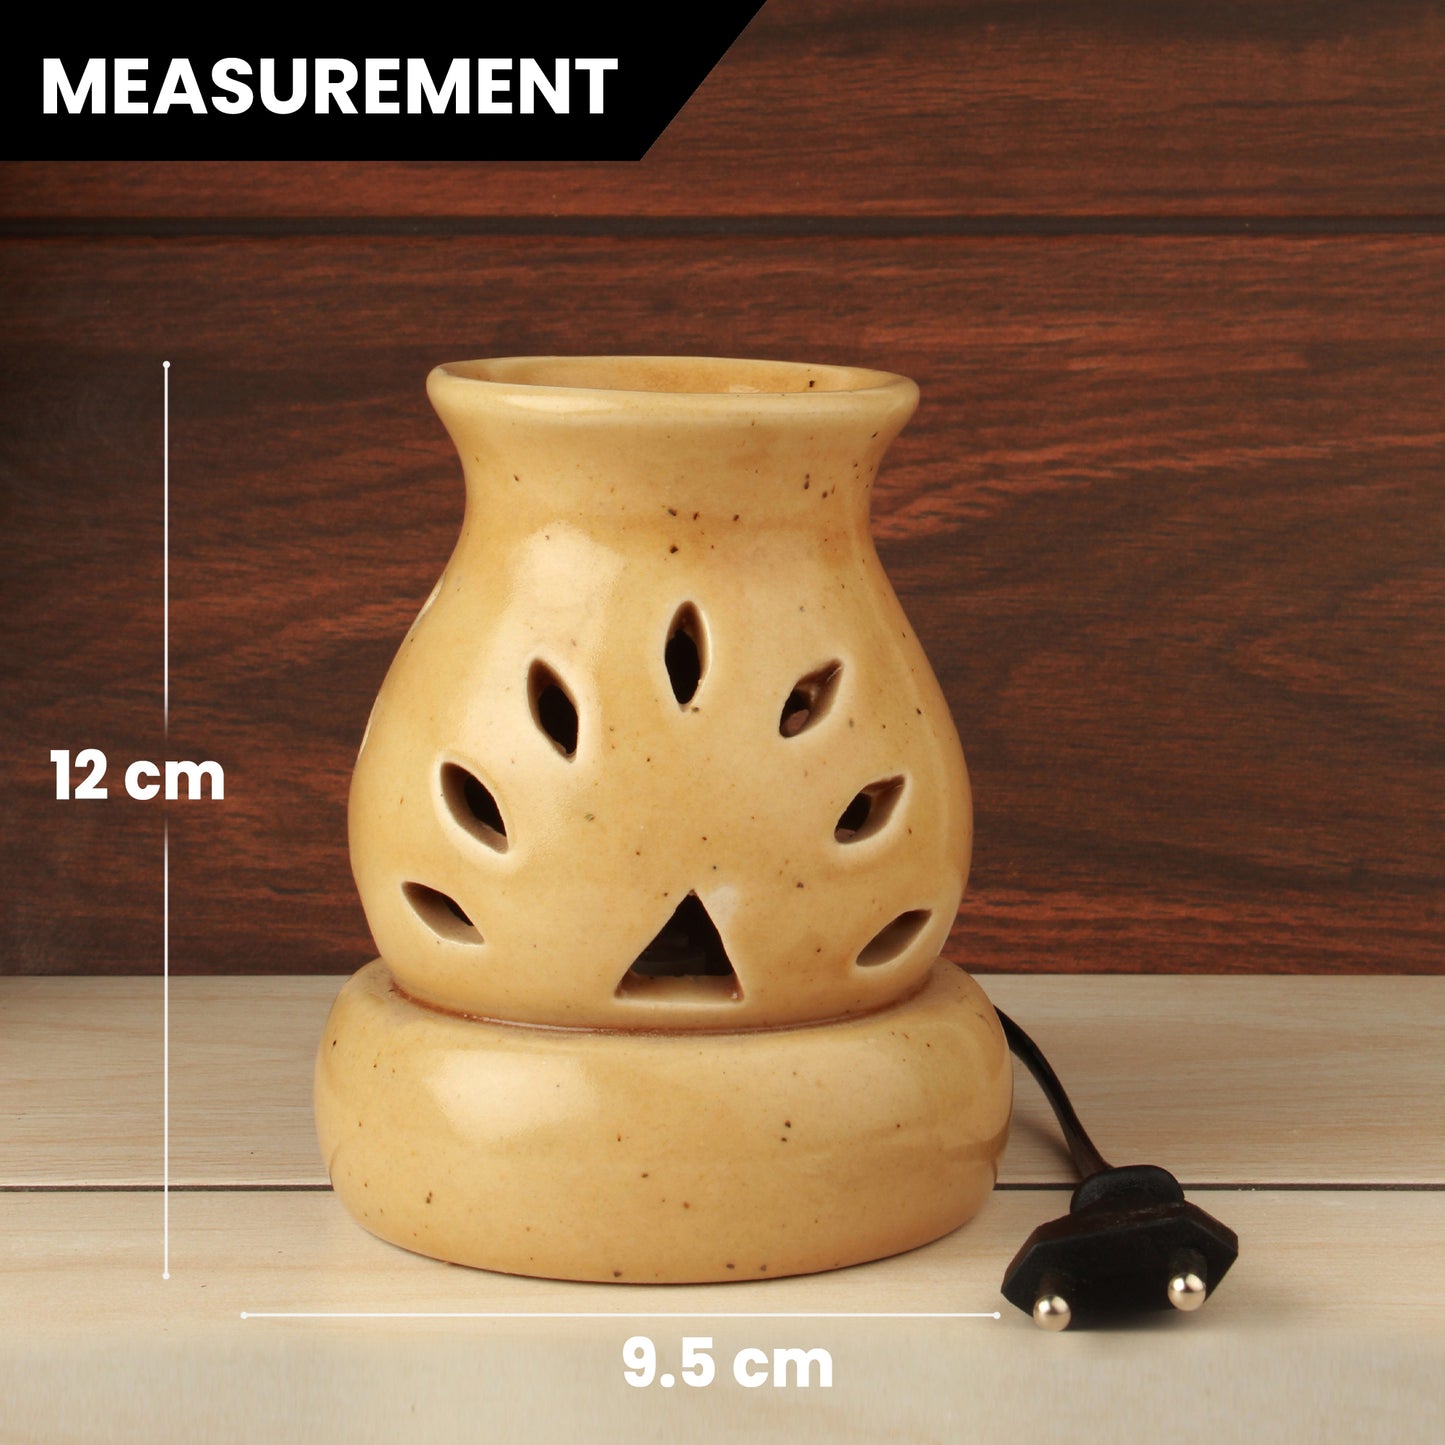 Handcrafted Electric Ceramic Aroma Oil Diffuser Night Lamp, Aromatherapy Oil Burner/Wax Warmer